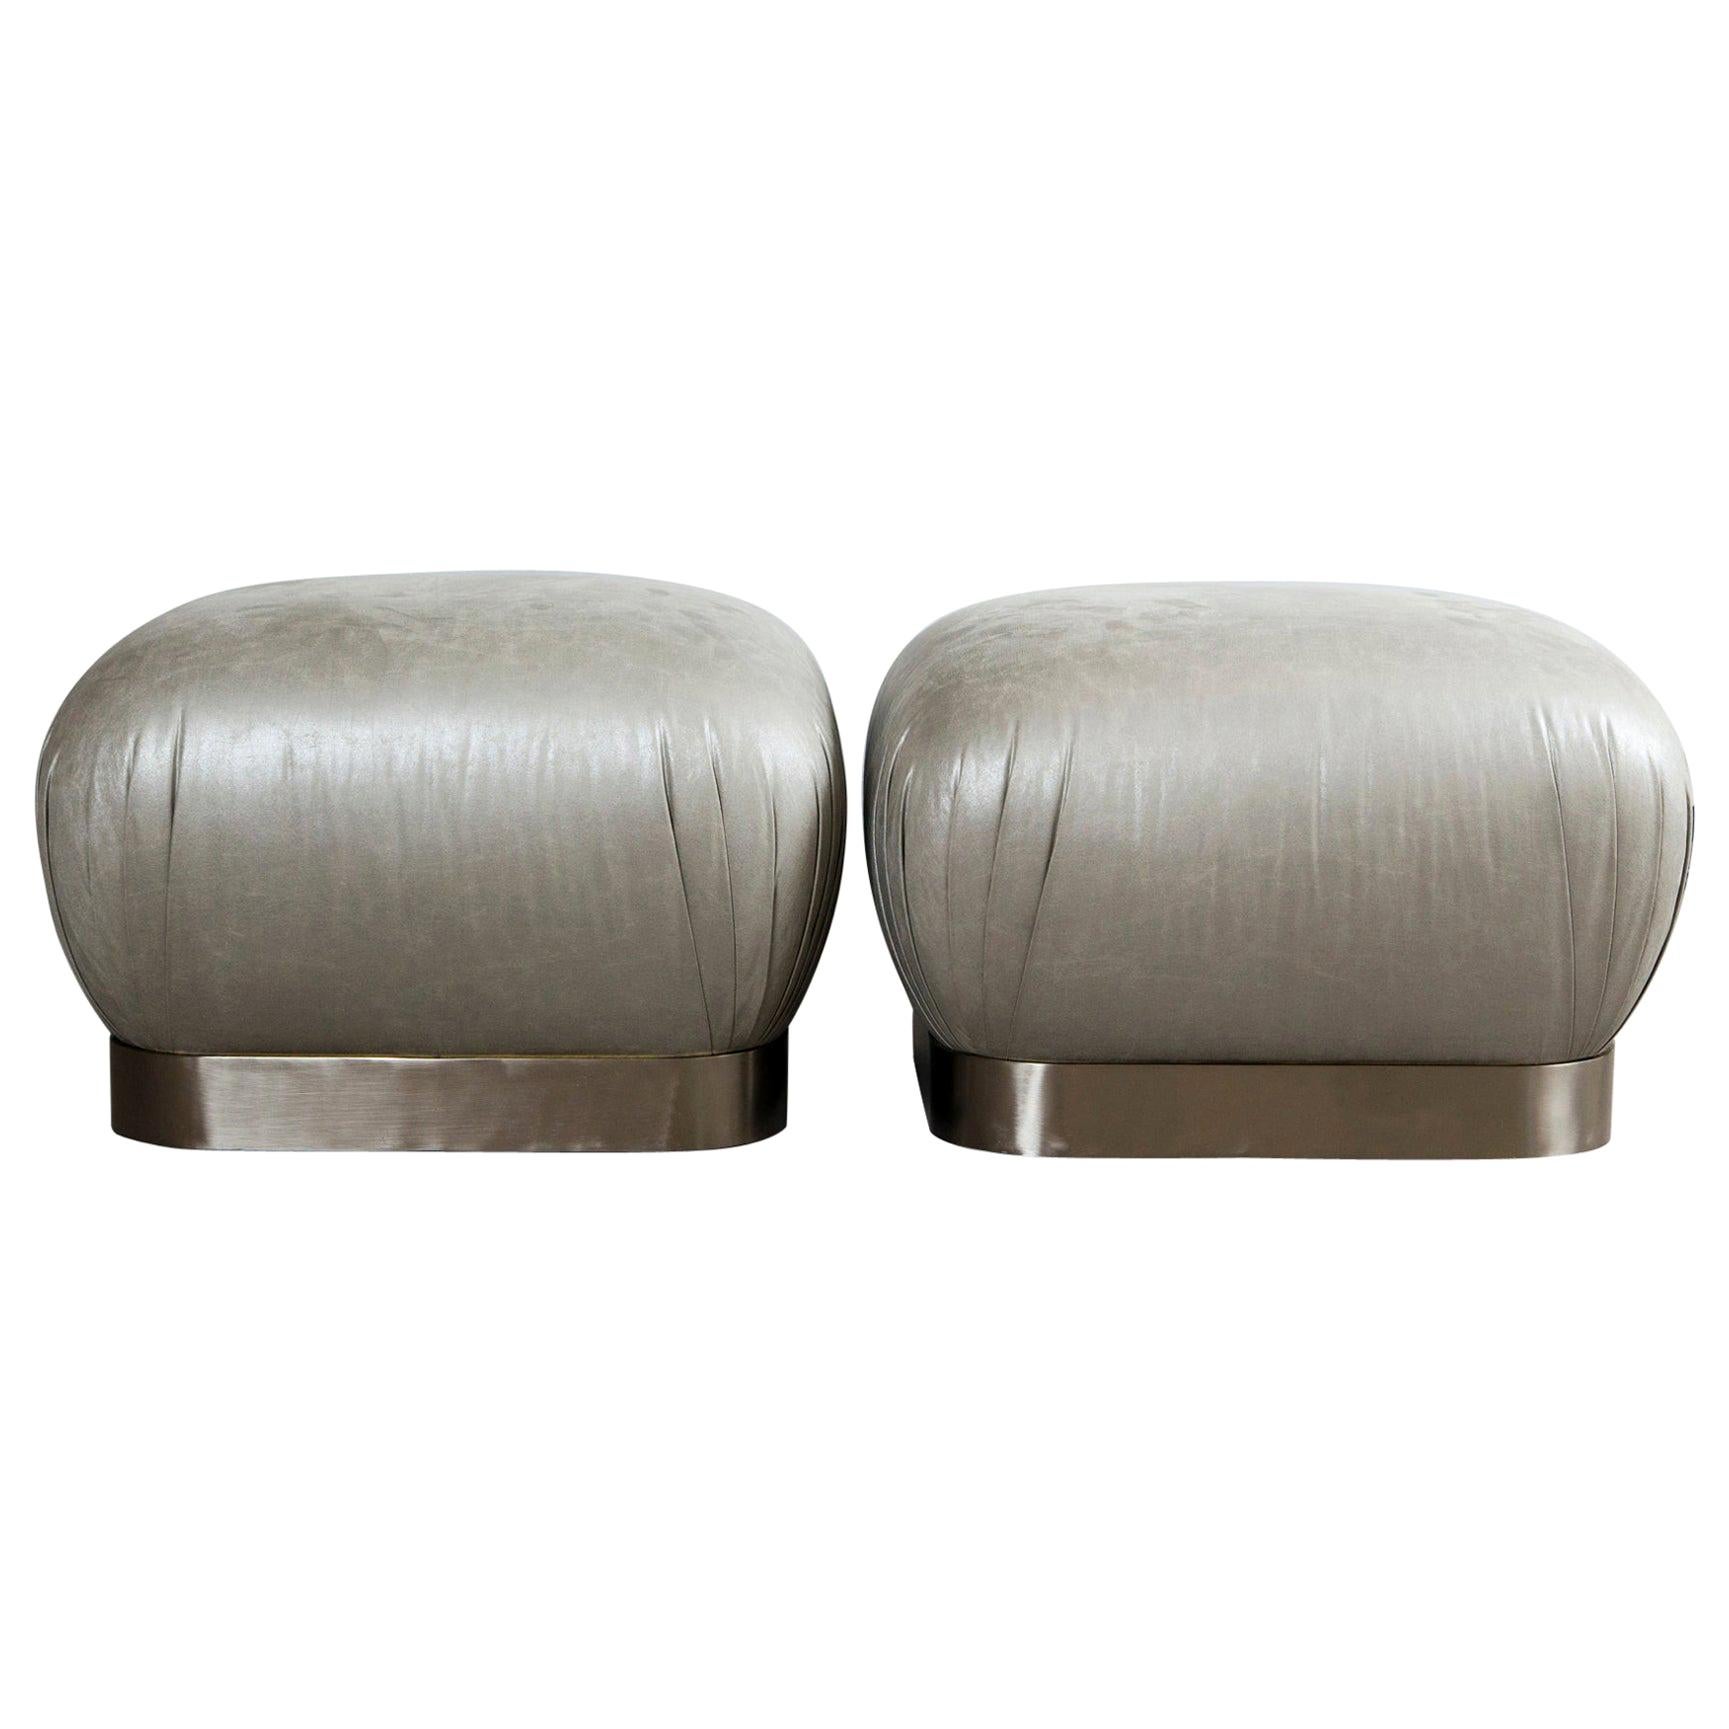 Grey Leather & Stainless Steel Karl Springer Style Souffle Ottomans Wheels, Pair